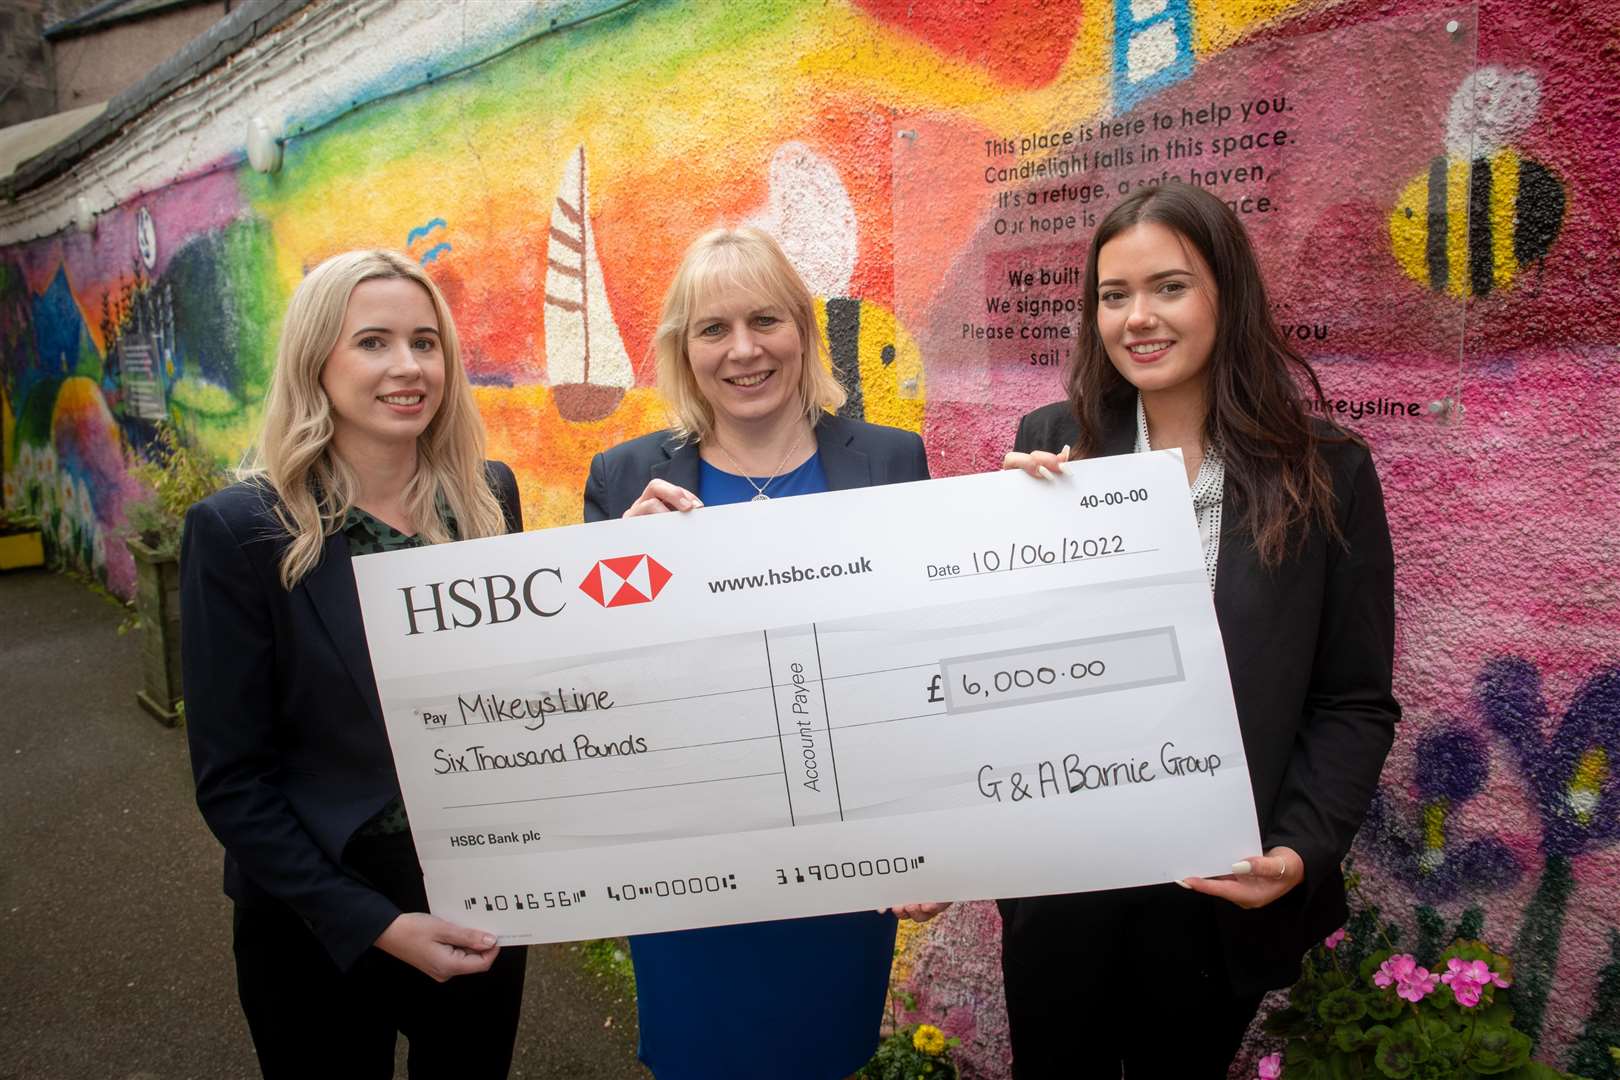 Emily Stokes of Mikeysline (centre) with Lynne Allan and Isla Henstock of G&A Barnie Group Ltd. Picture: Callum Mackay